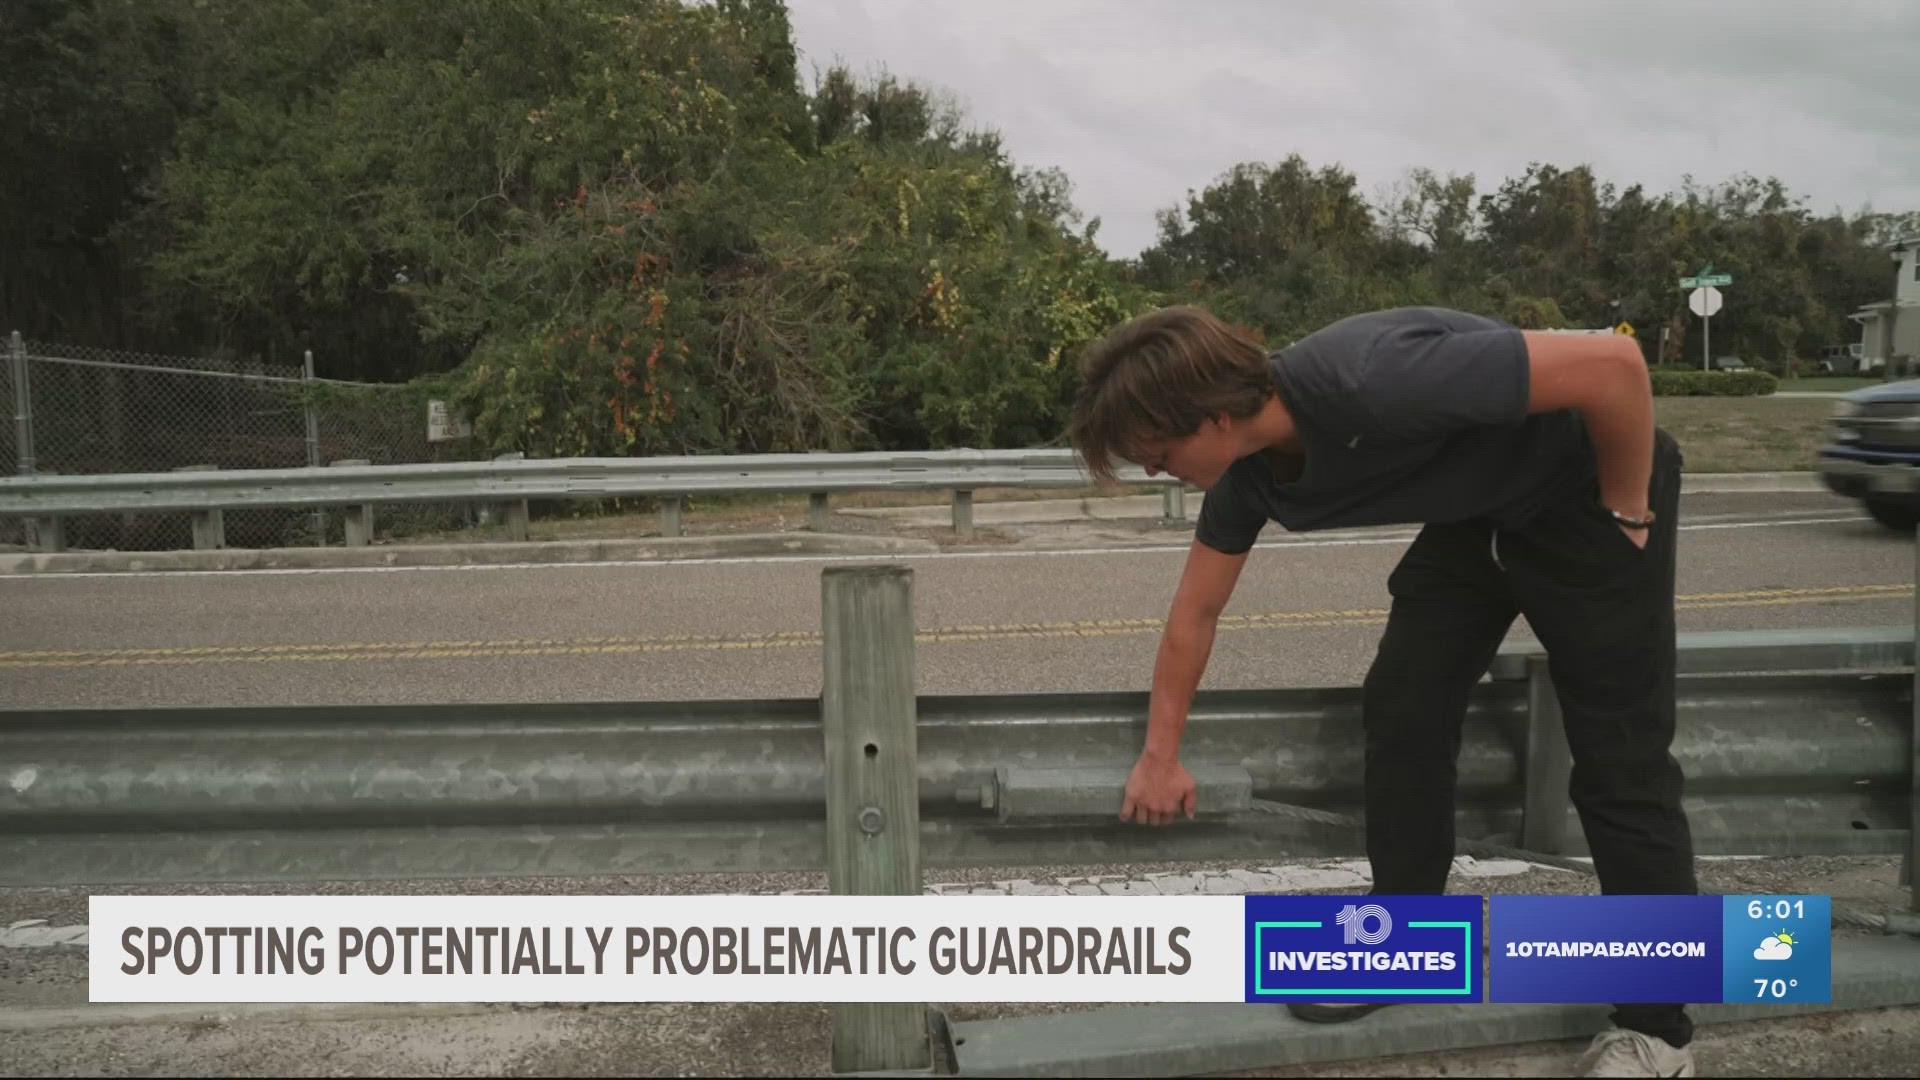 County leaders are implementing a new policy in hopes roads no longer have potentially deadly guardrails.